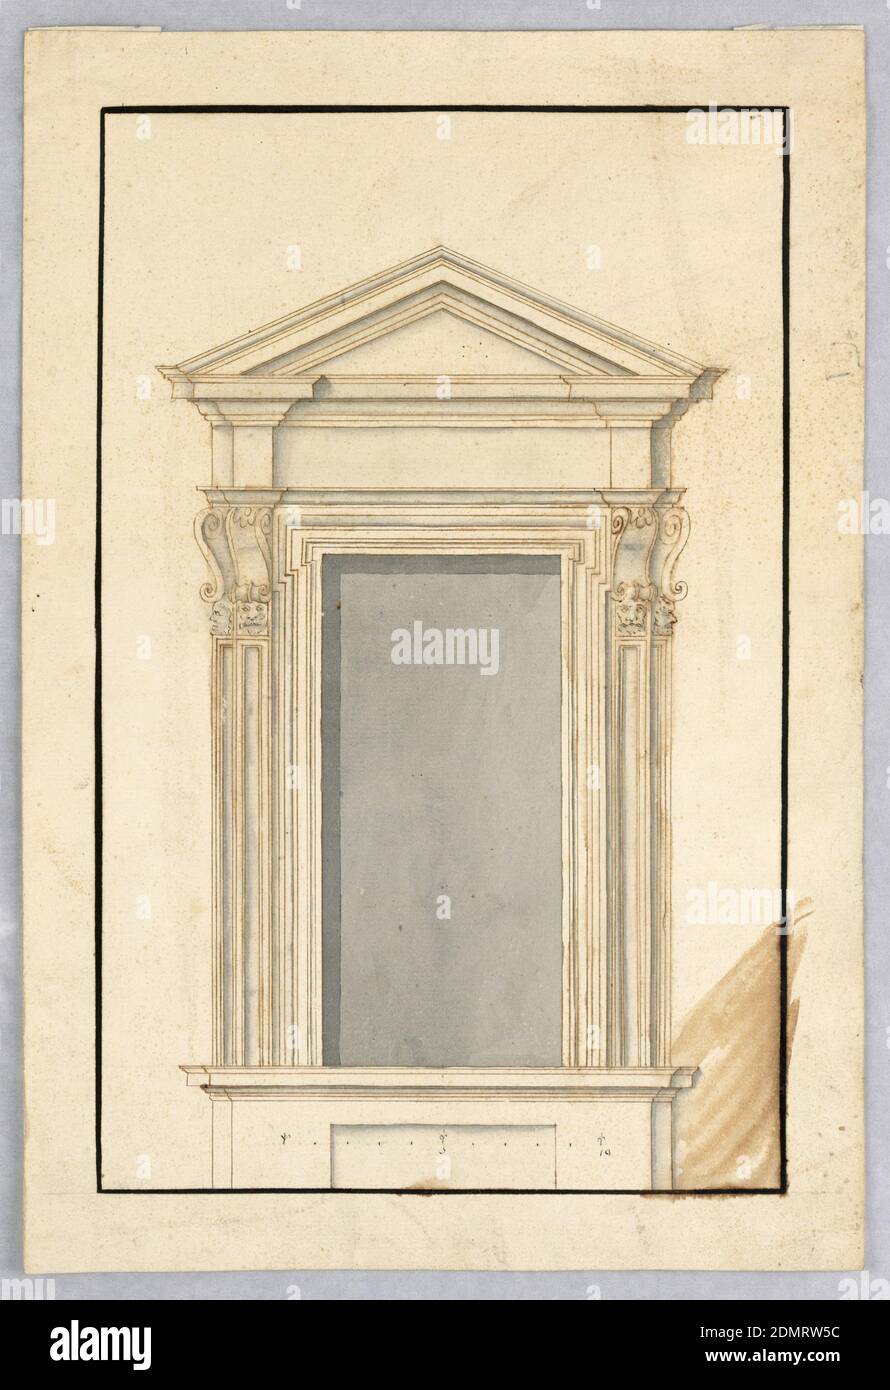 Project for a Window Case, Pen and brown ink, brush and gray wash on off-white laid paper, Window case with triangular pediment, whose frieze is supported by corbels with masks at the base., Italy, 1650–1700, architecture, Drawing Stock Photo